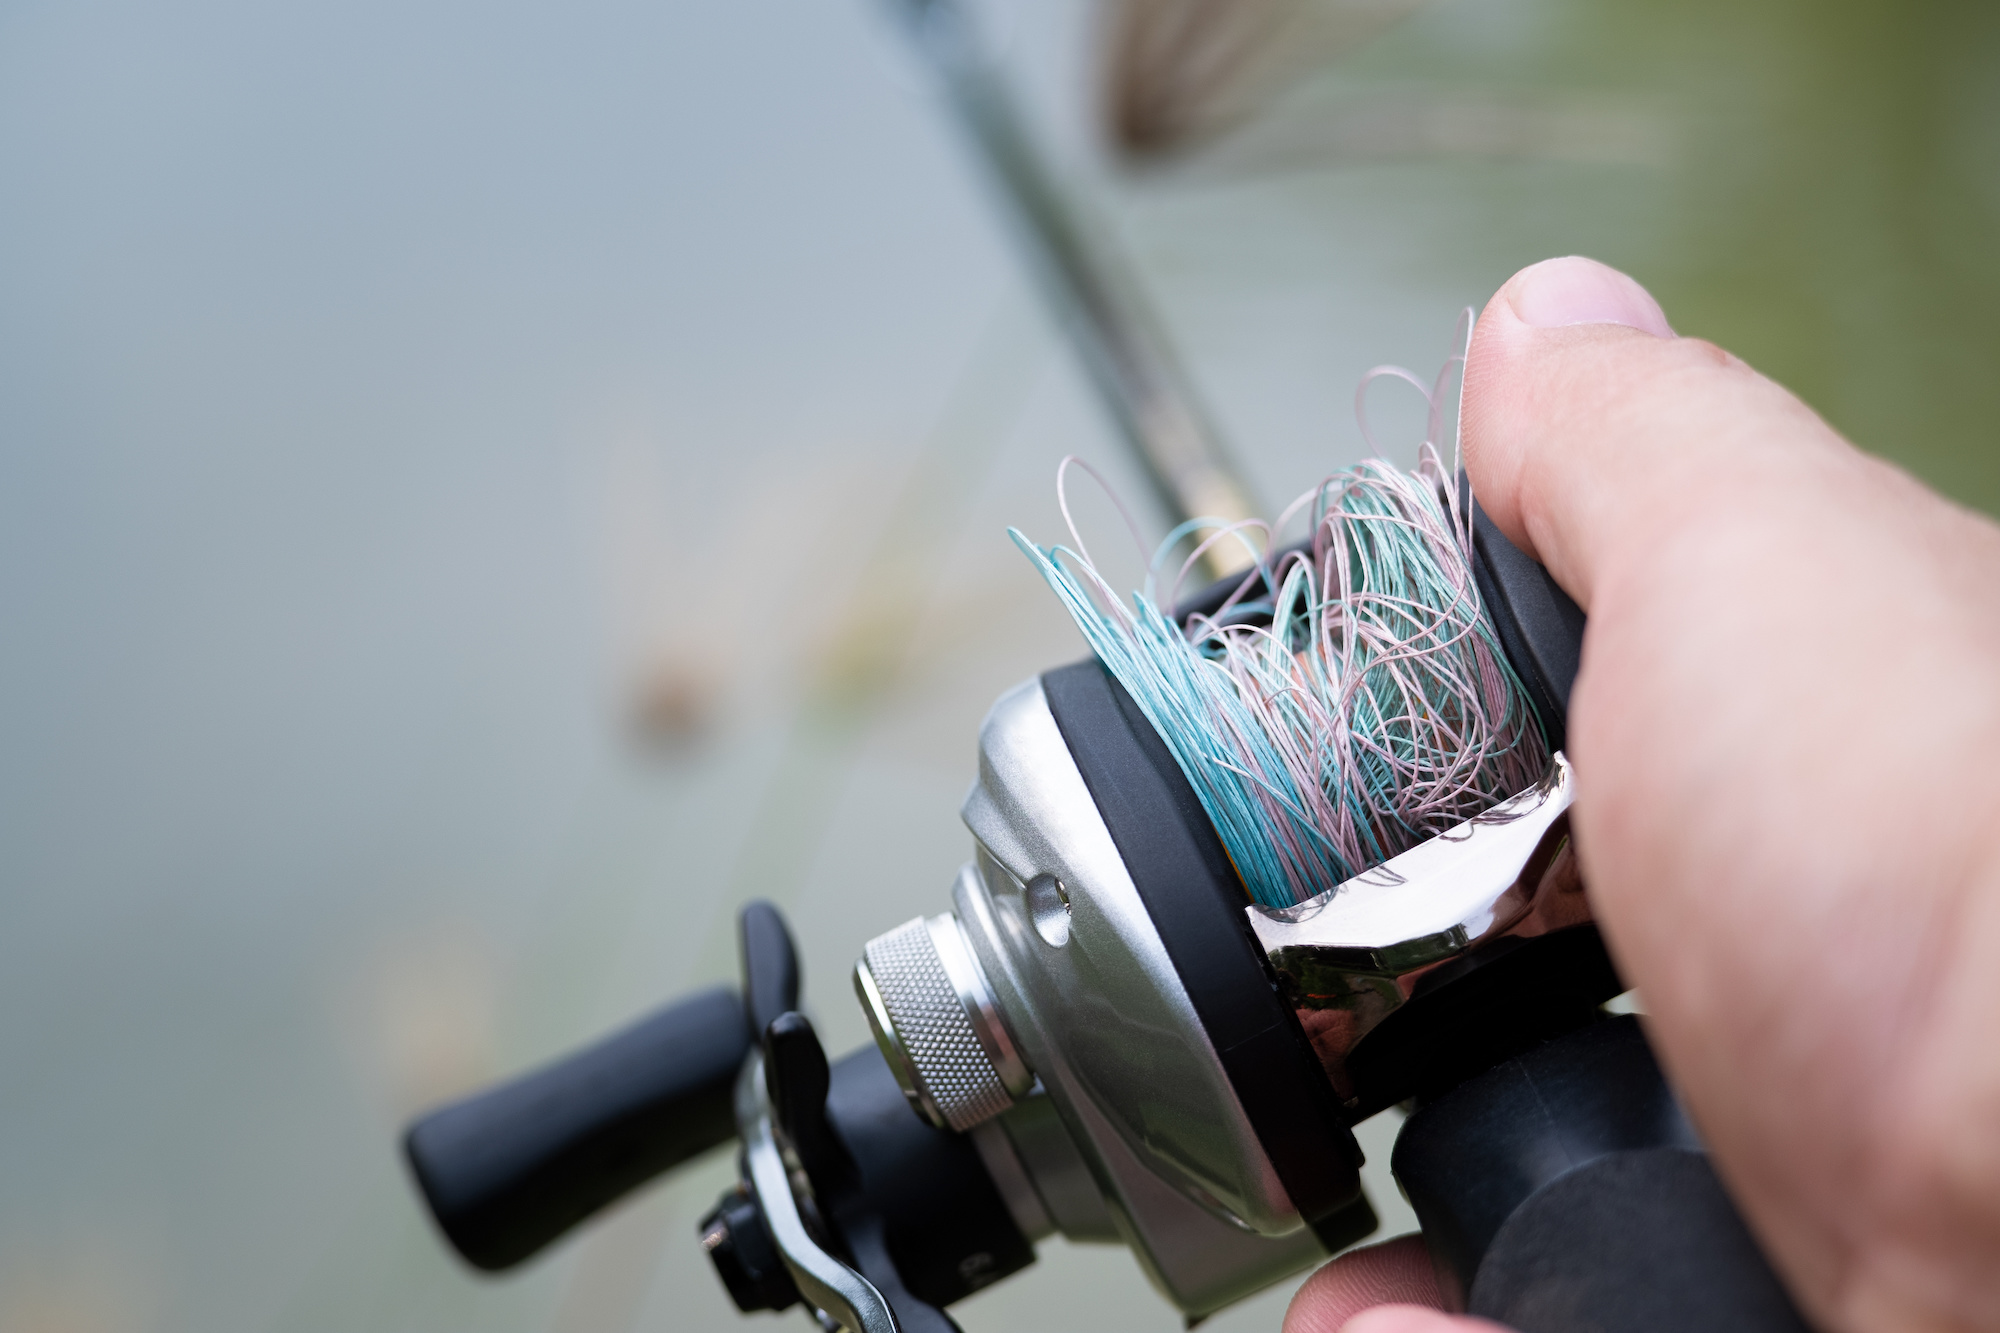 How to Avoid Line Tangles When Fishing